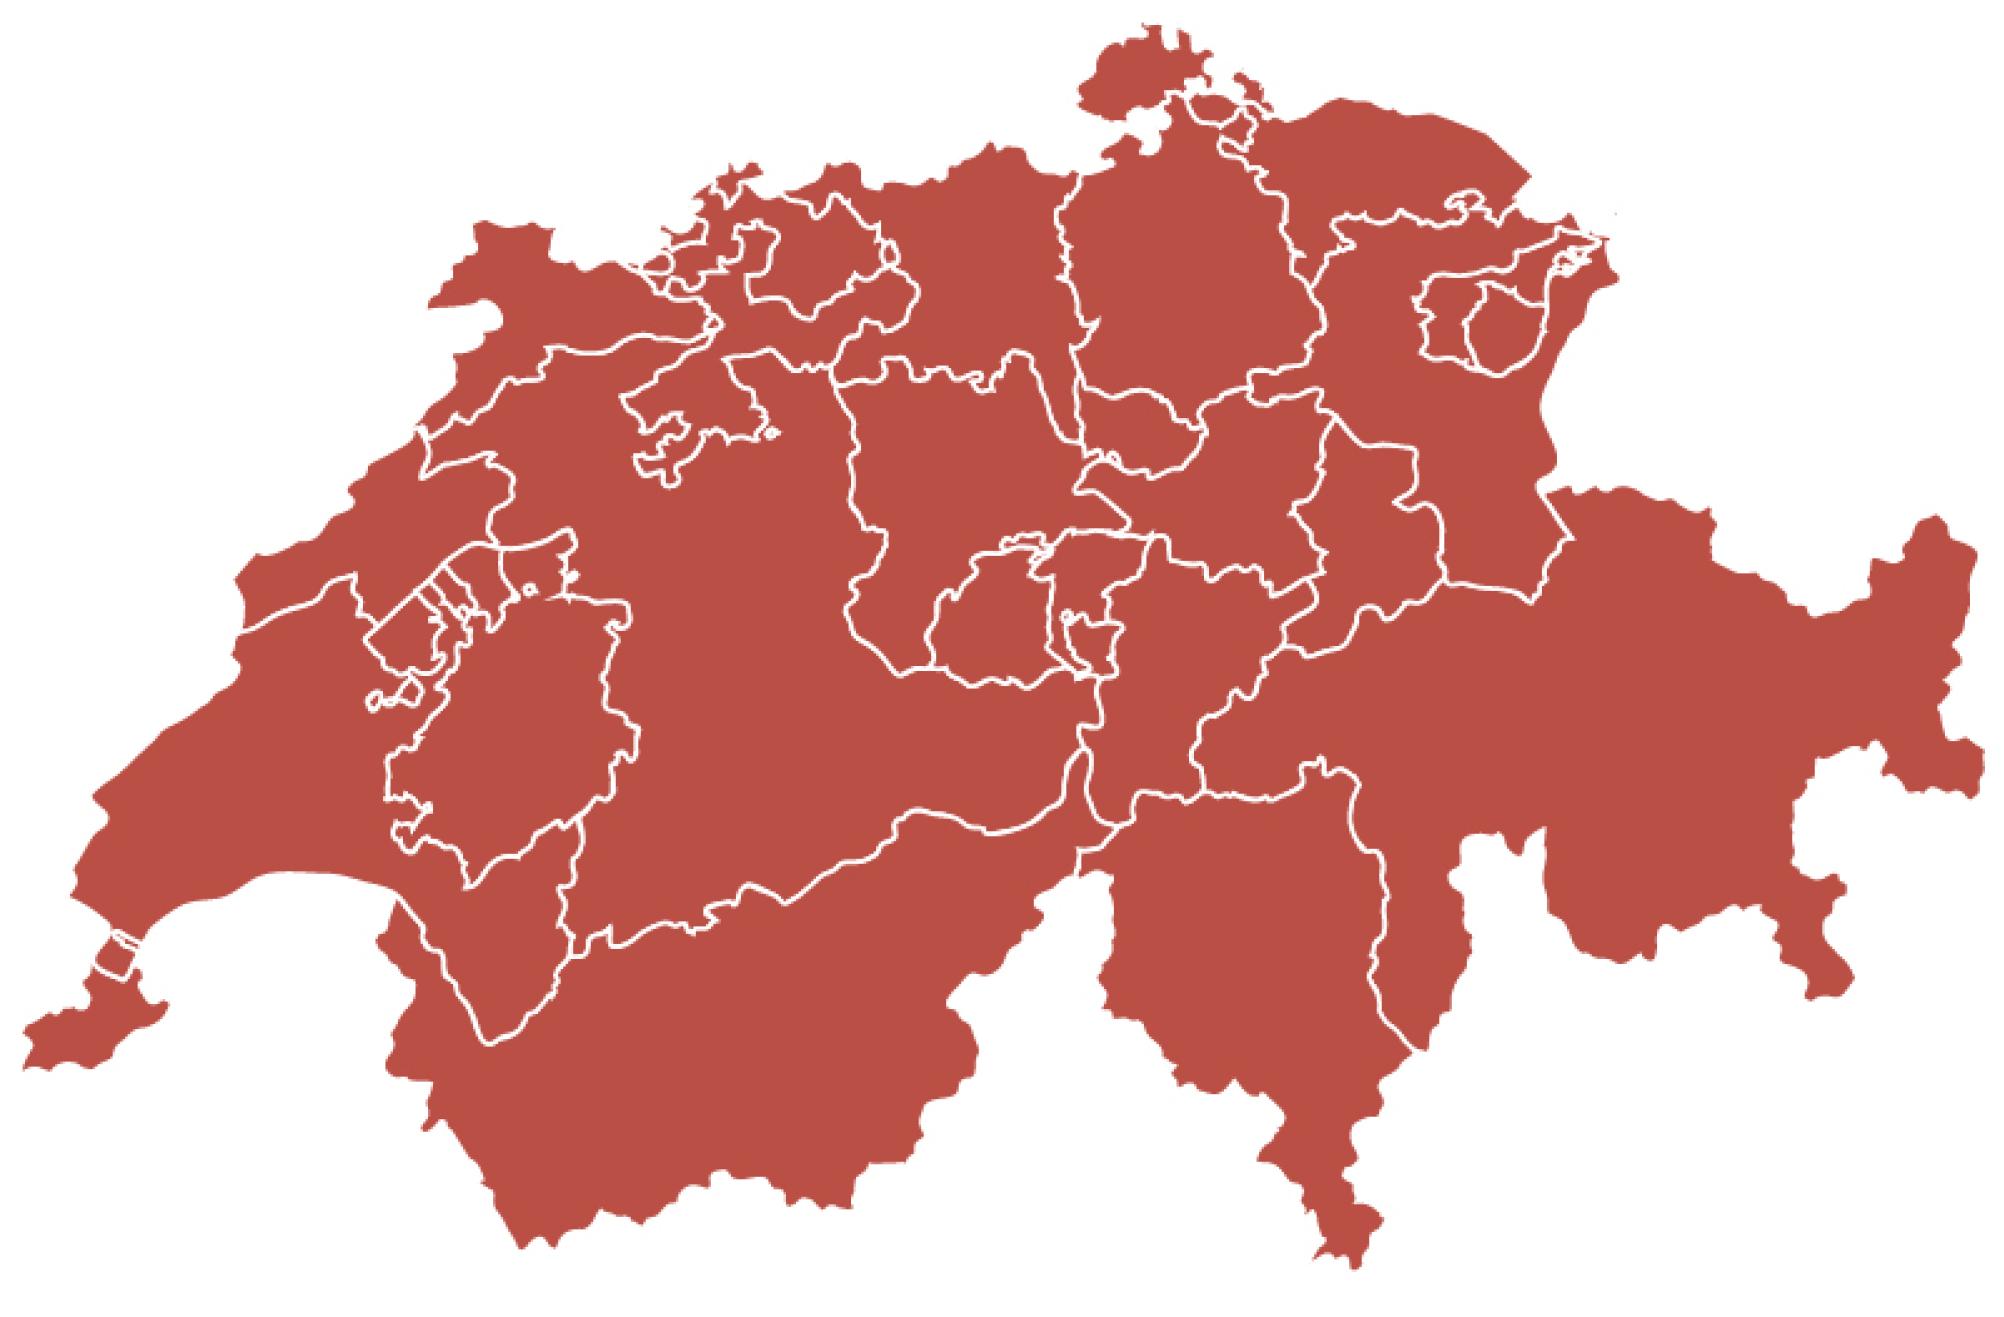 The second map also shows the cantonal borders.